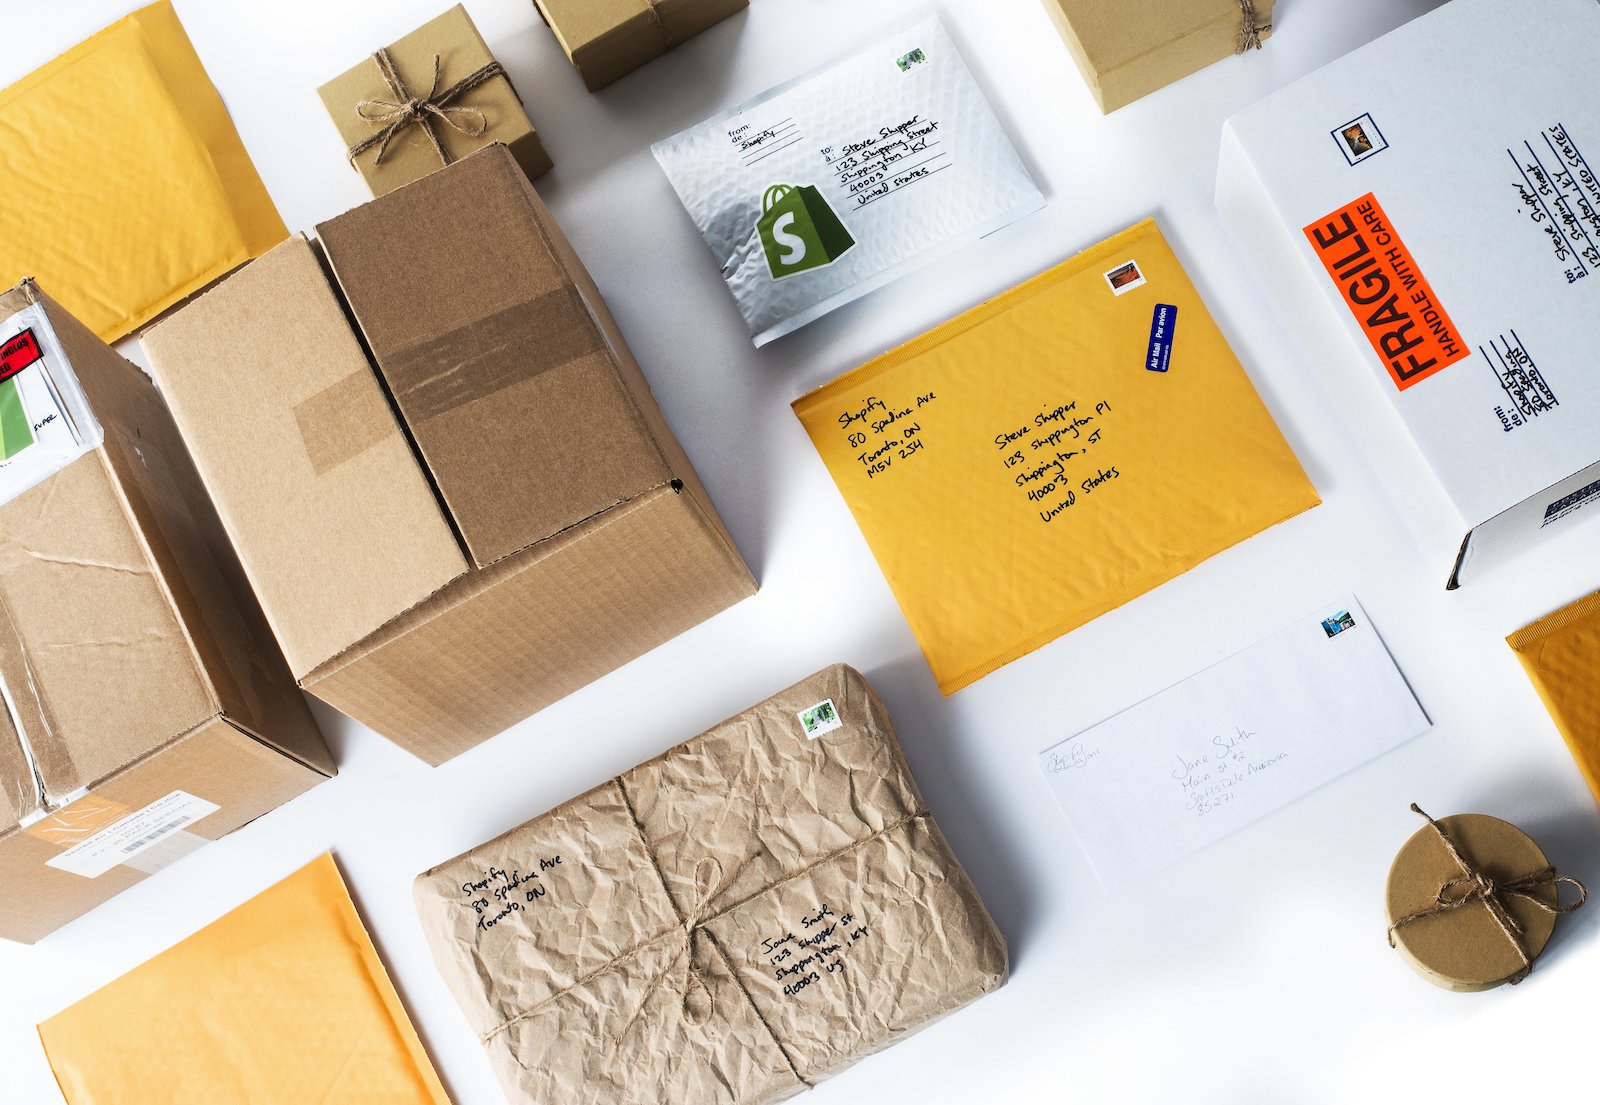 For Prime 1-Day Shipping,  Wants Sellers to Send It More Stuff